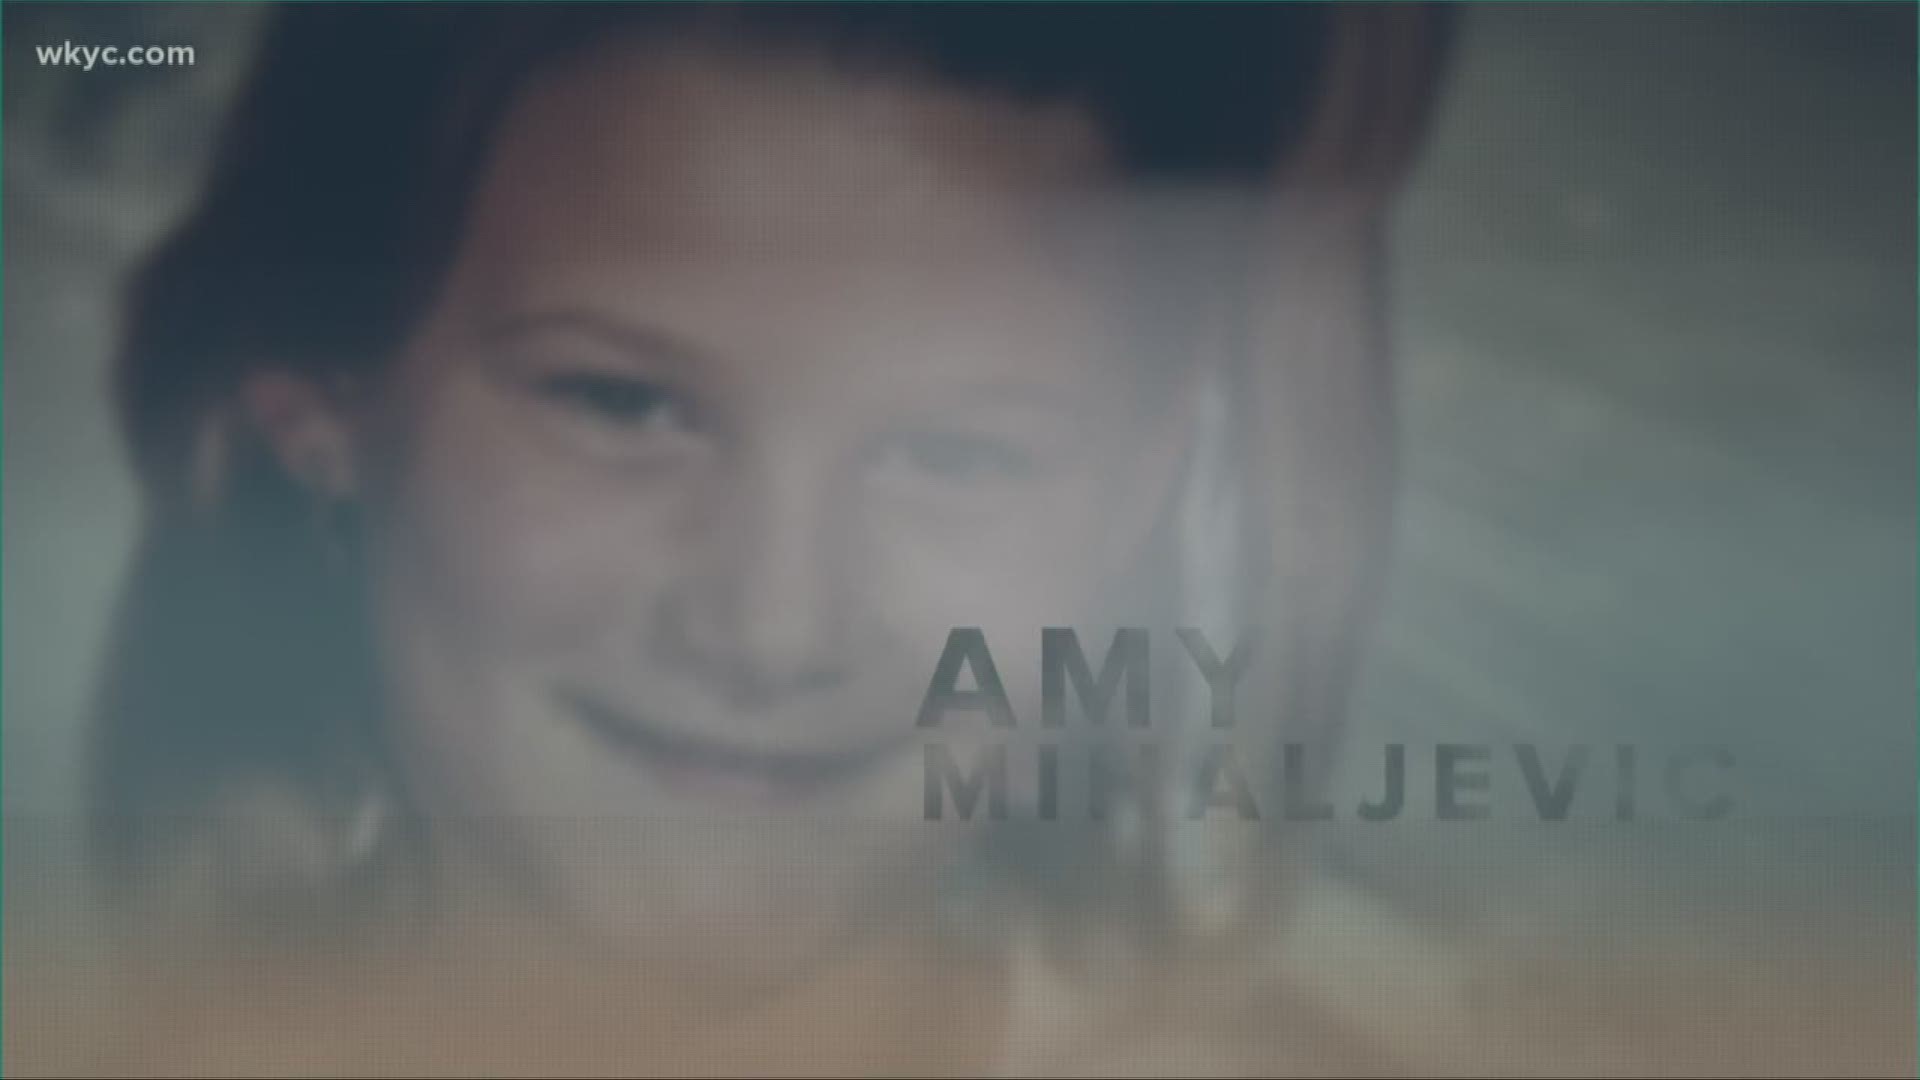 The Amy Mihaljevic Story: What we know and what remains unknown